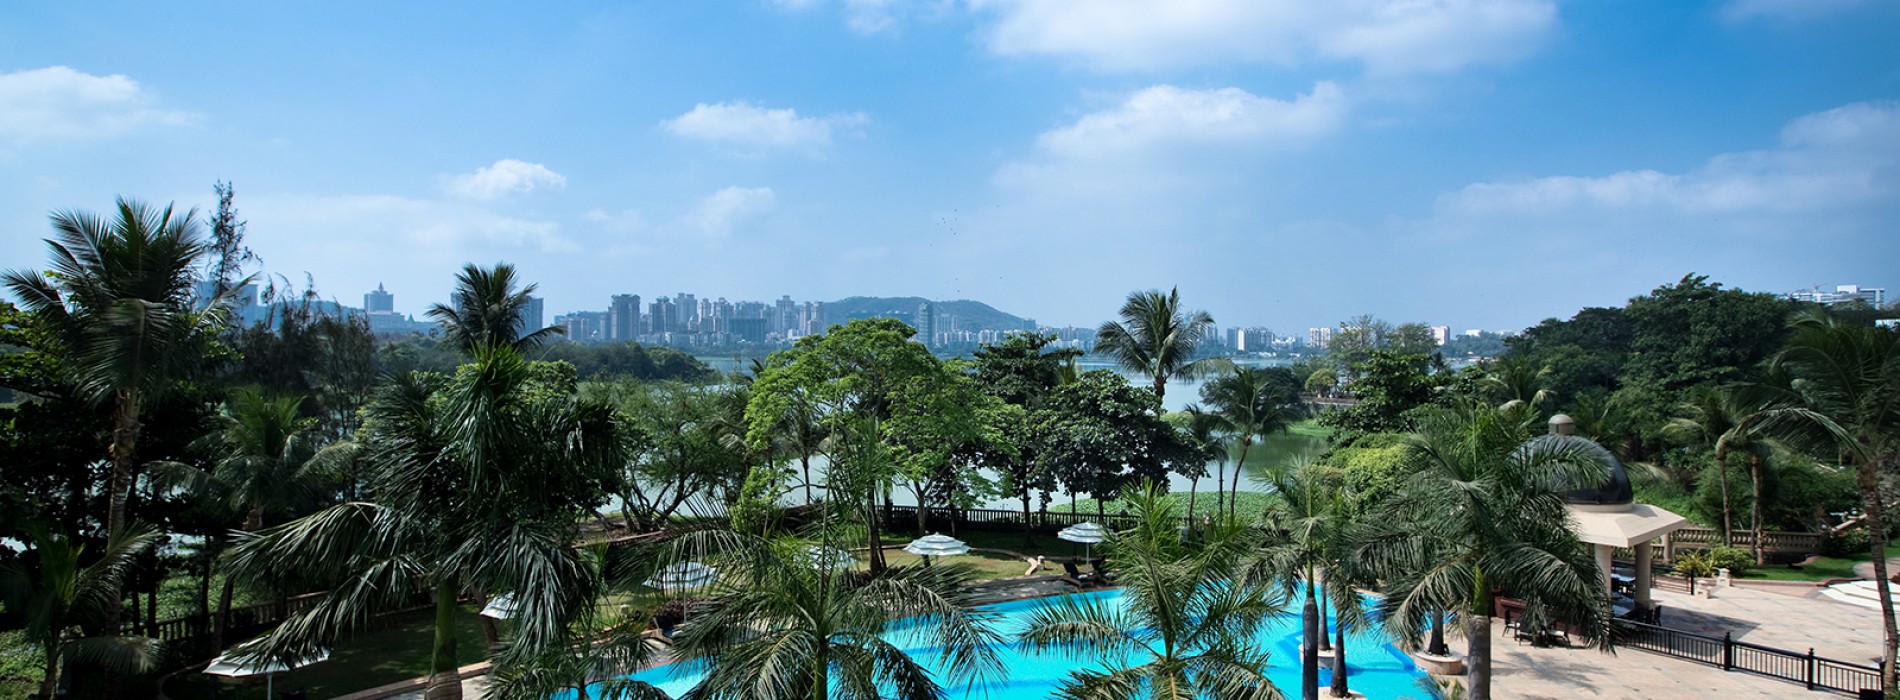 Celebrate Father’s Day weekend with luxurious stay at the Renaissance Mumbai